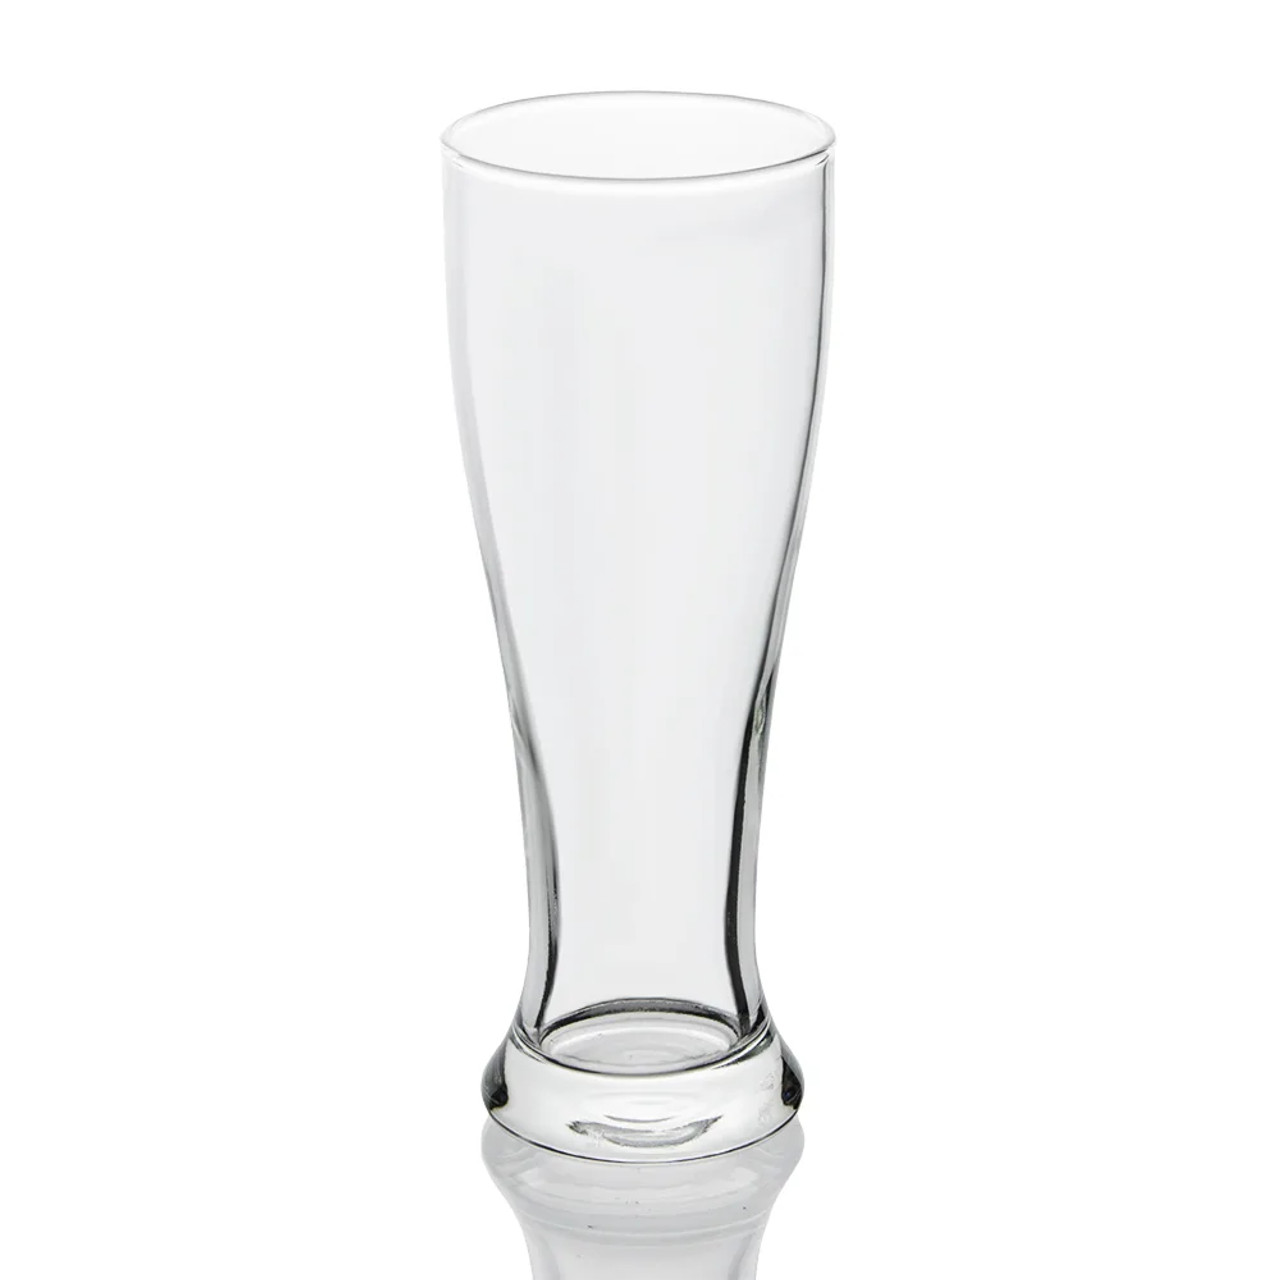 Libbey 1604 16 oz Pilsner Glass - Flared Bottom for Enhanced Beer (24/Case) - Chicken Pieces